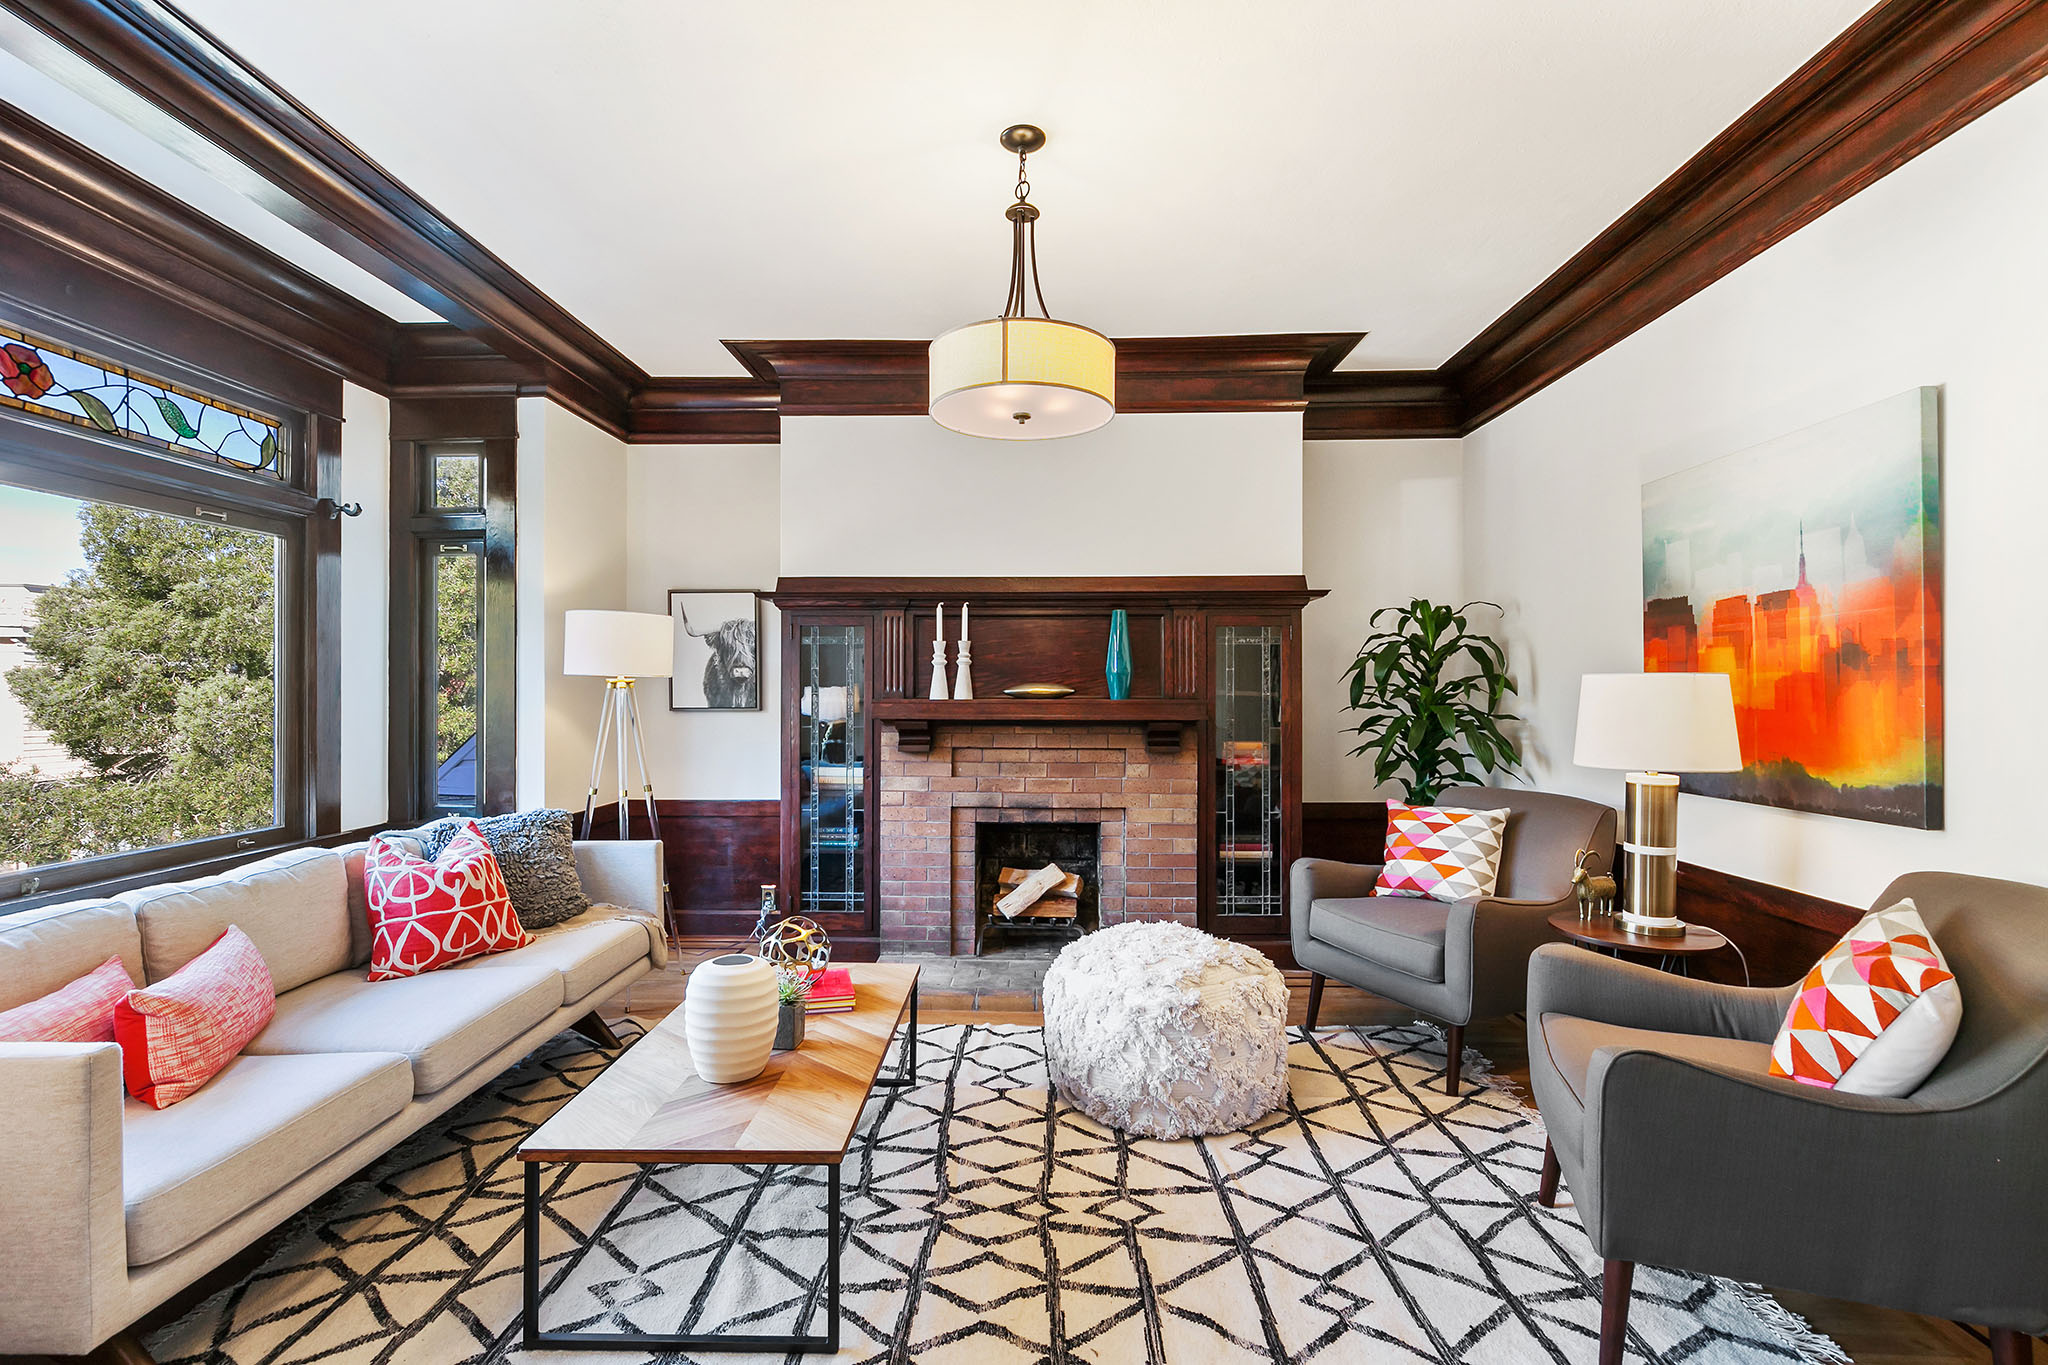 Property Photo: Living room with wood crown moulding and a fireplace